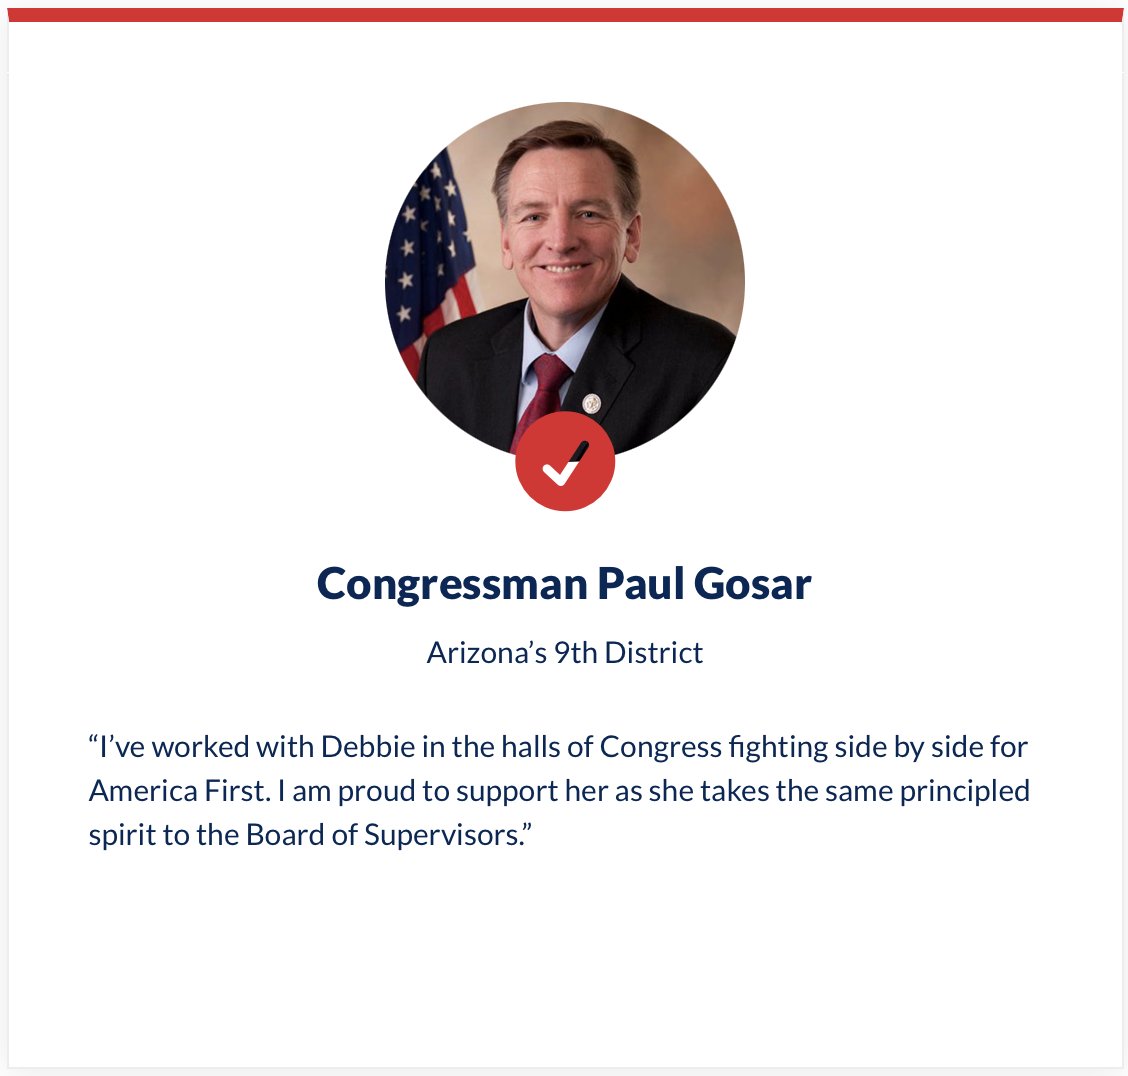 ICYMI: My friend and colleague @DrPaulGosar endorsed me for the Maricopa County Board of Supervisors in District 4!